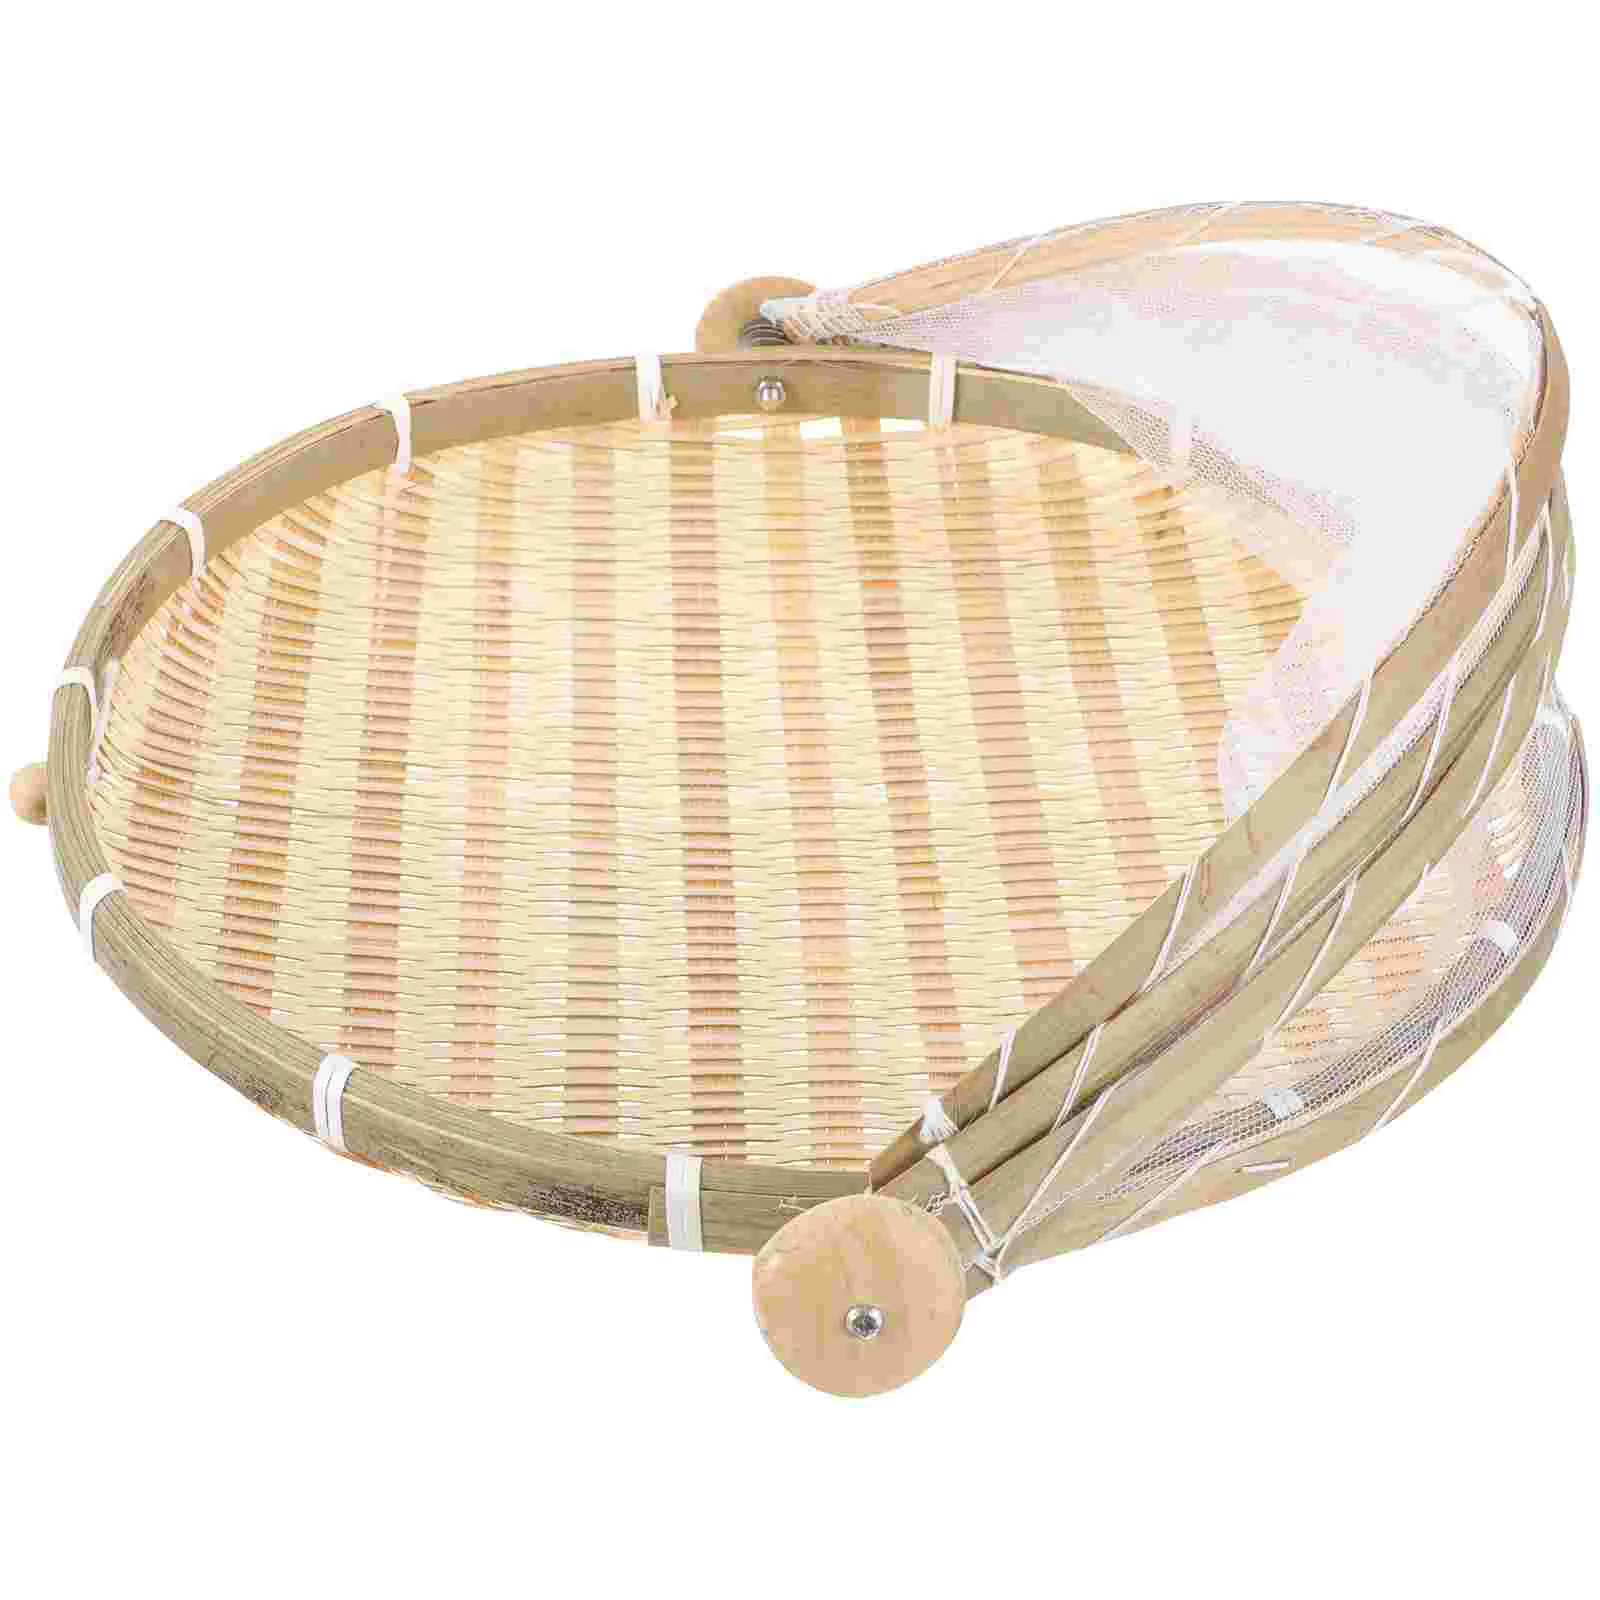 

Dustpan Storage Basket Bamboo Woven Serving Tray Cover Mesh Covers Food Tent Lid Bread Fruit Baskets